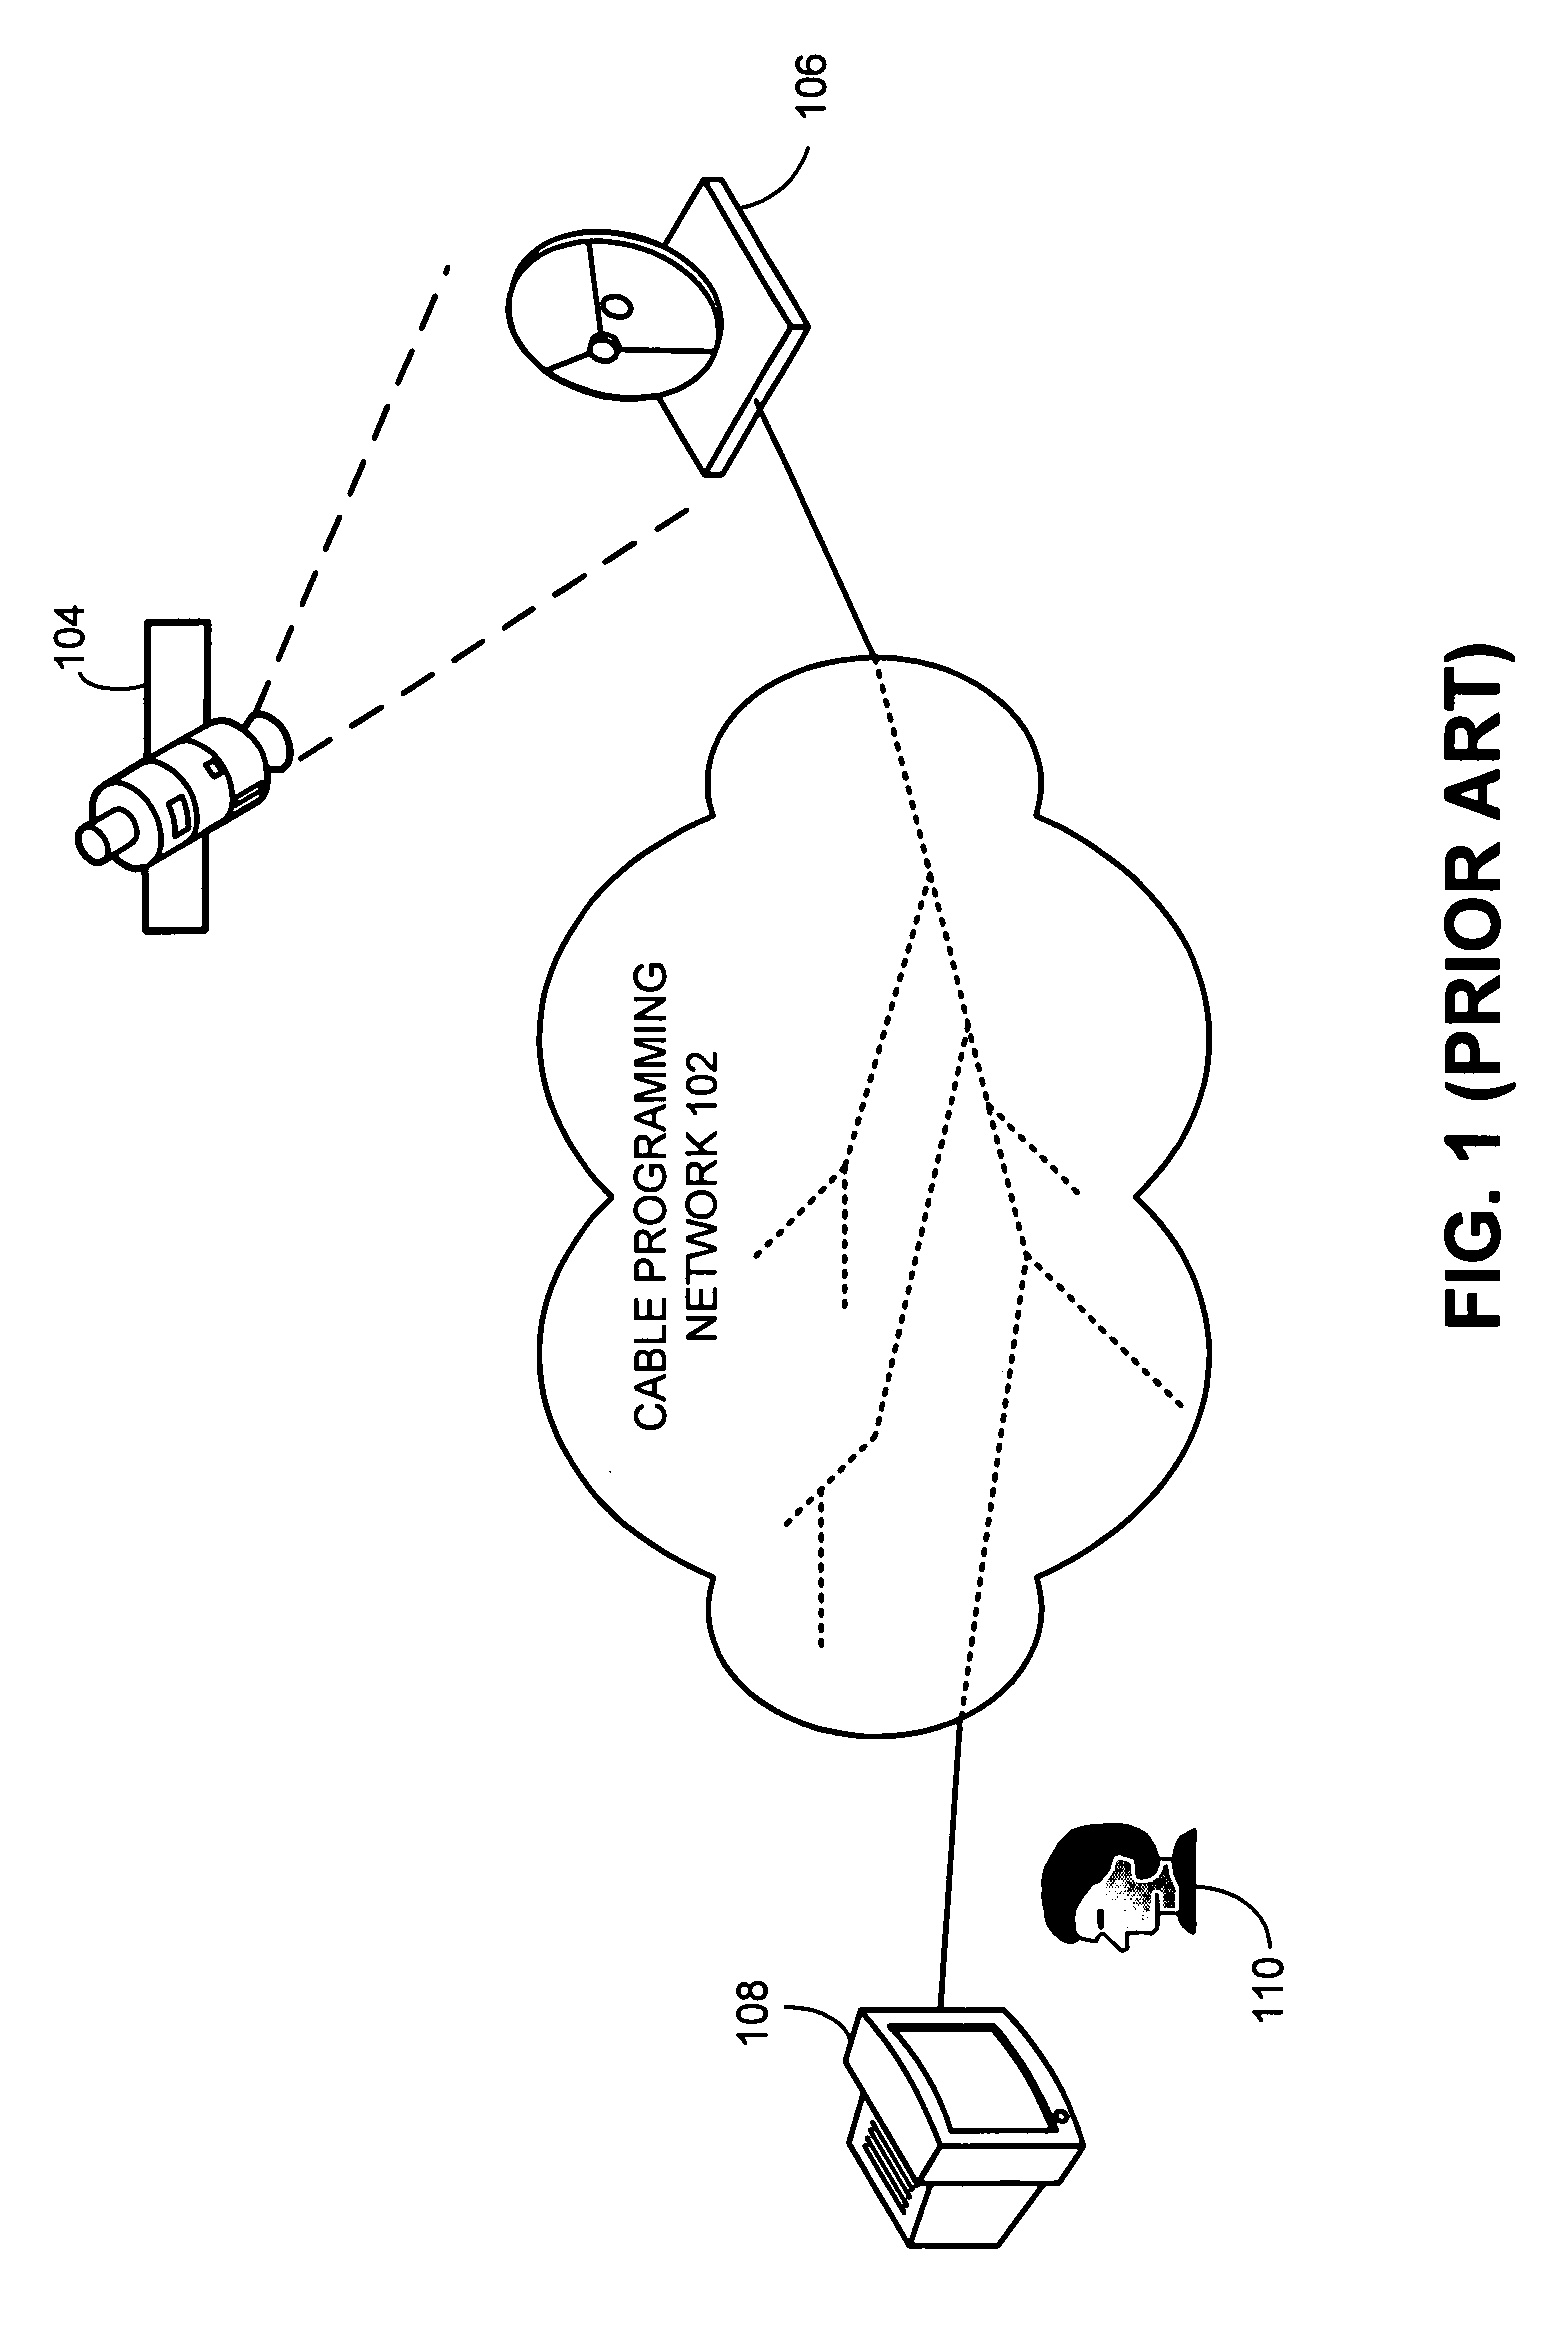 Method and system for expediting peer-to-peer content delivery with improved network utilization